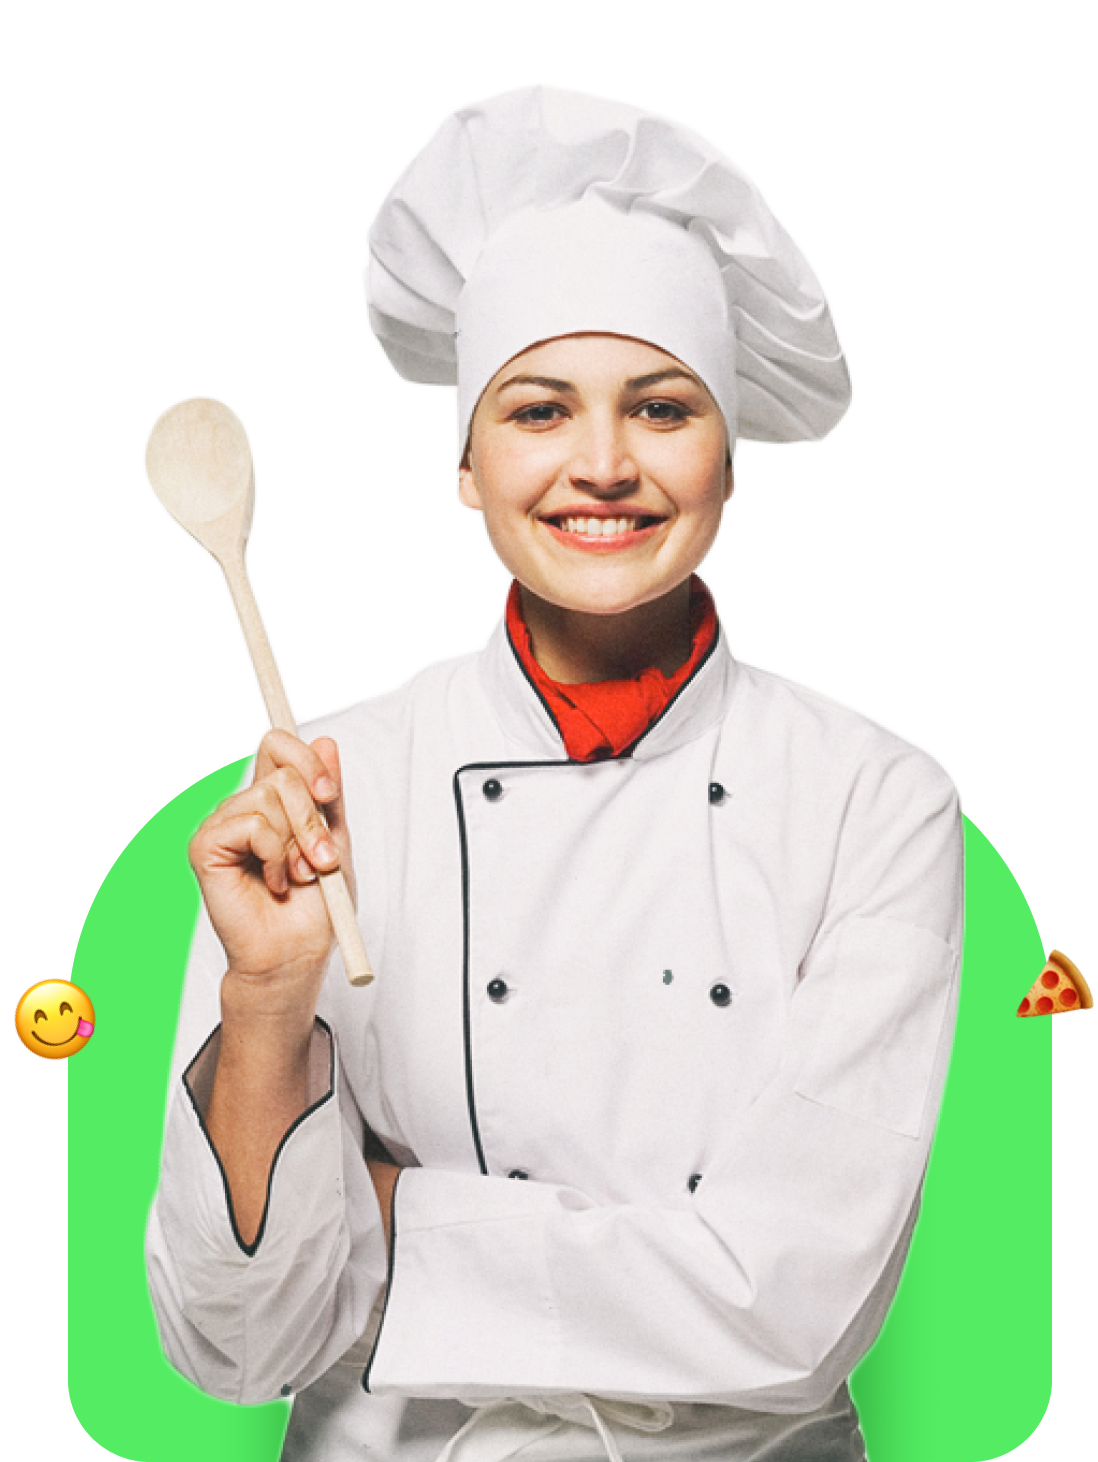 Our best chef image